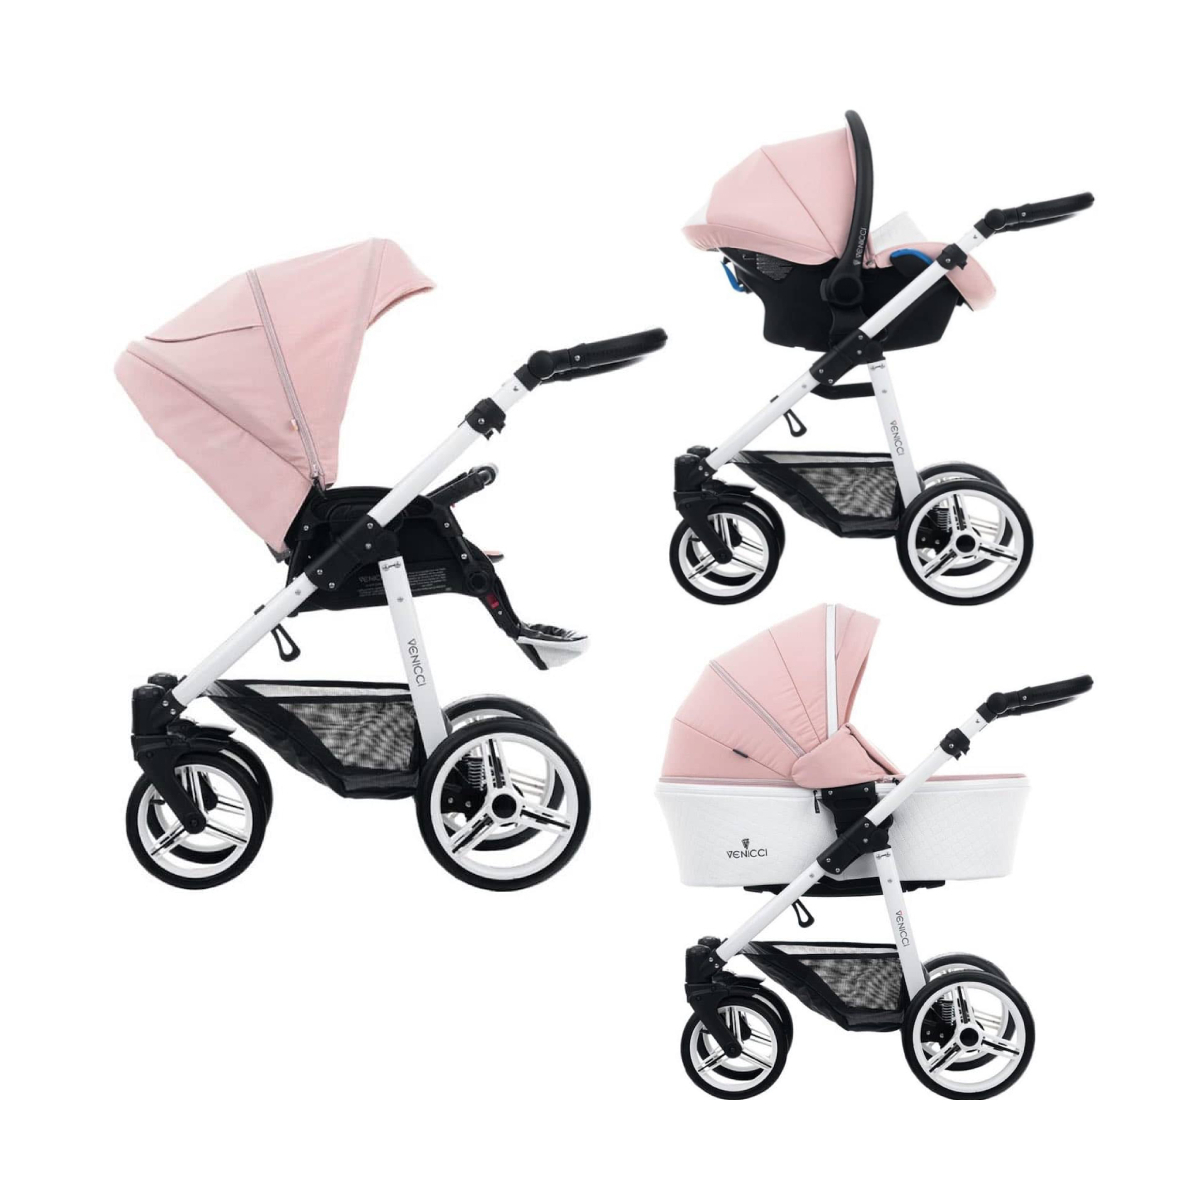 Venicci Pure 2.0 with White Chassis 3in1 Travel System – Rose (CL)